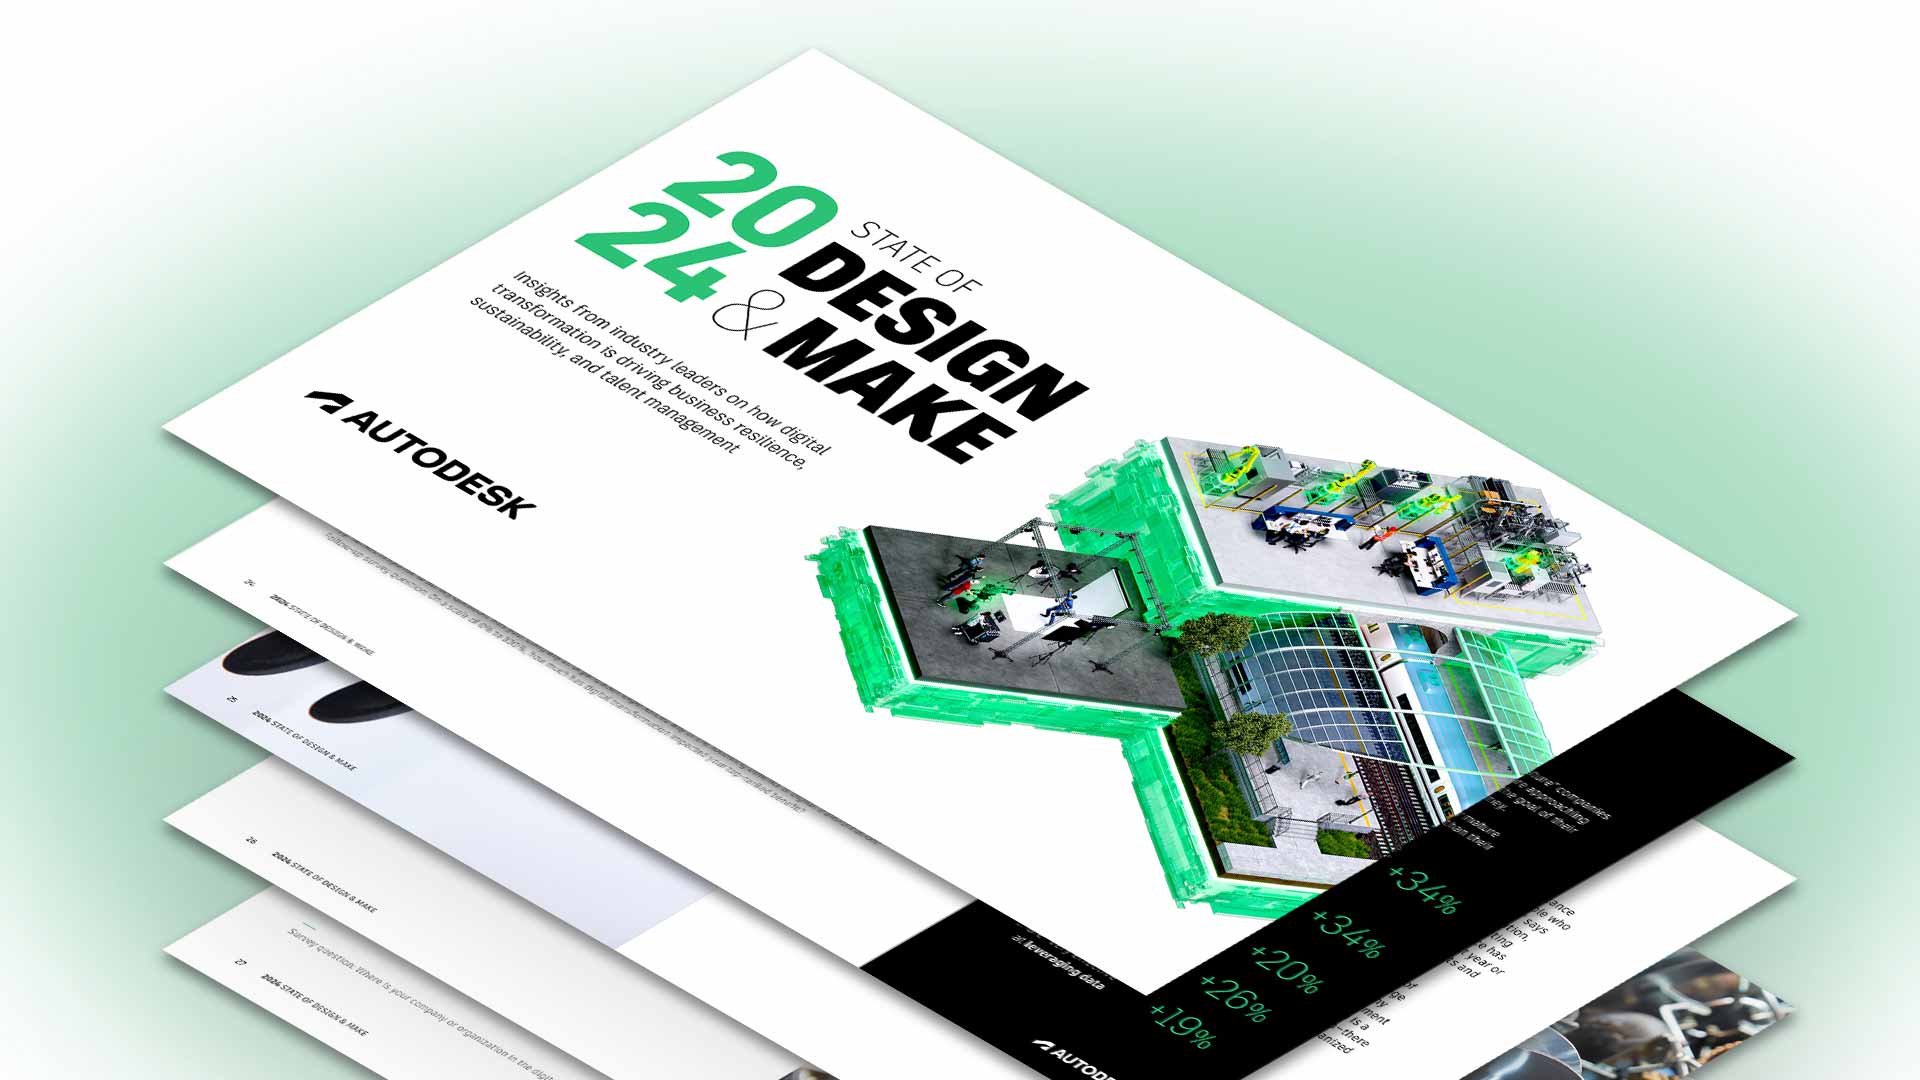 Autodesk_Article-1_State-of-Design-Make-Report-Graphic.jpg